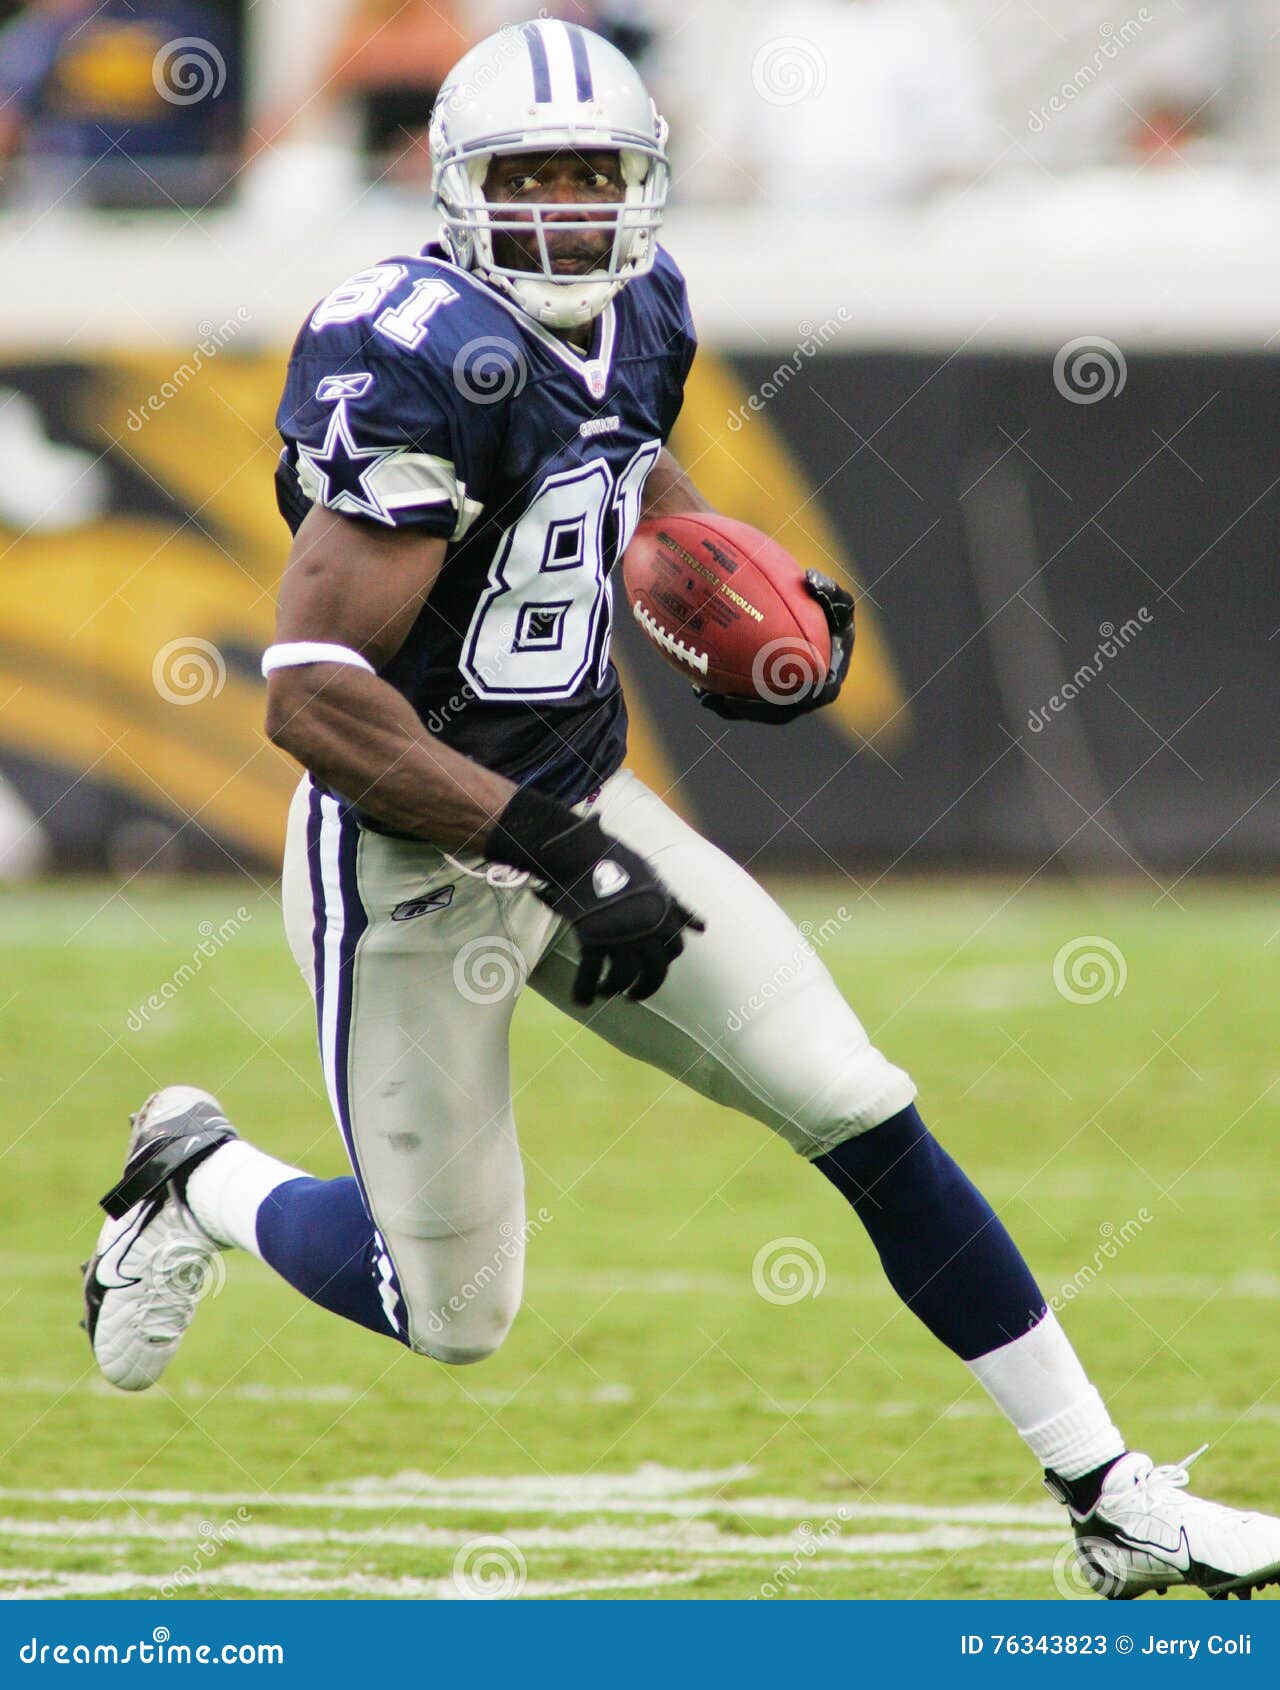 Terrell Owens editorial stock photo. Image of cowboys - 76343823